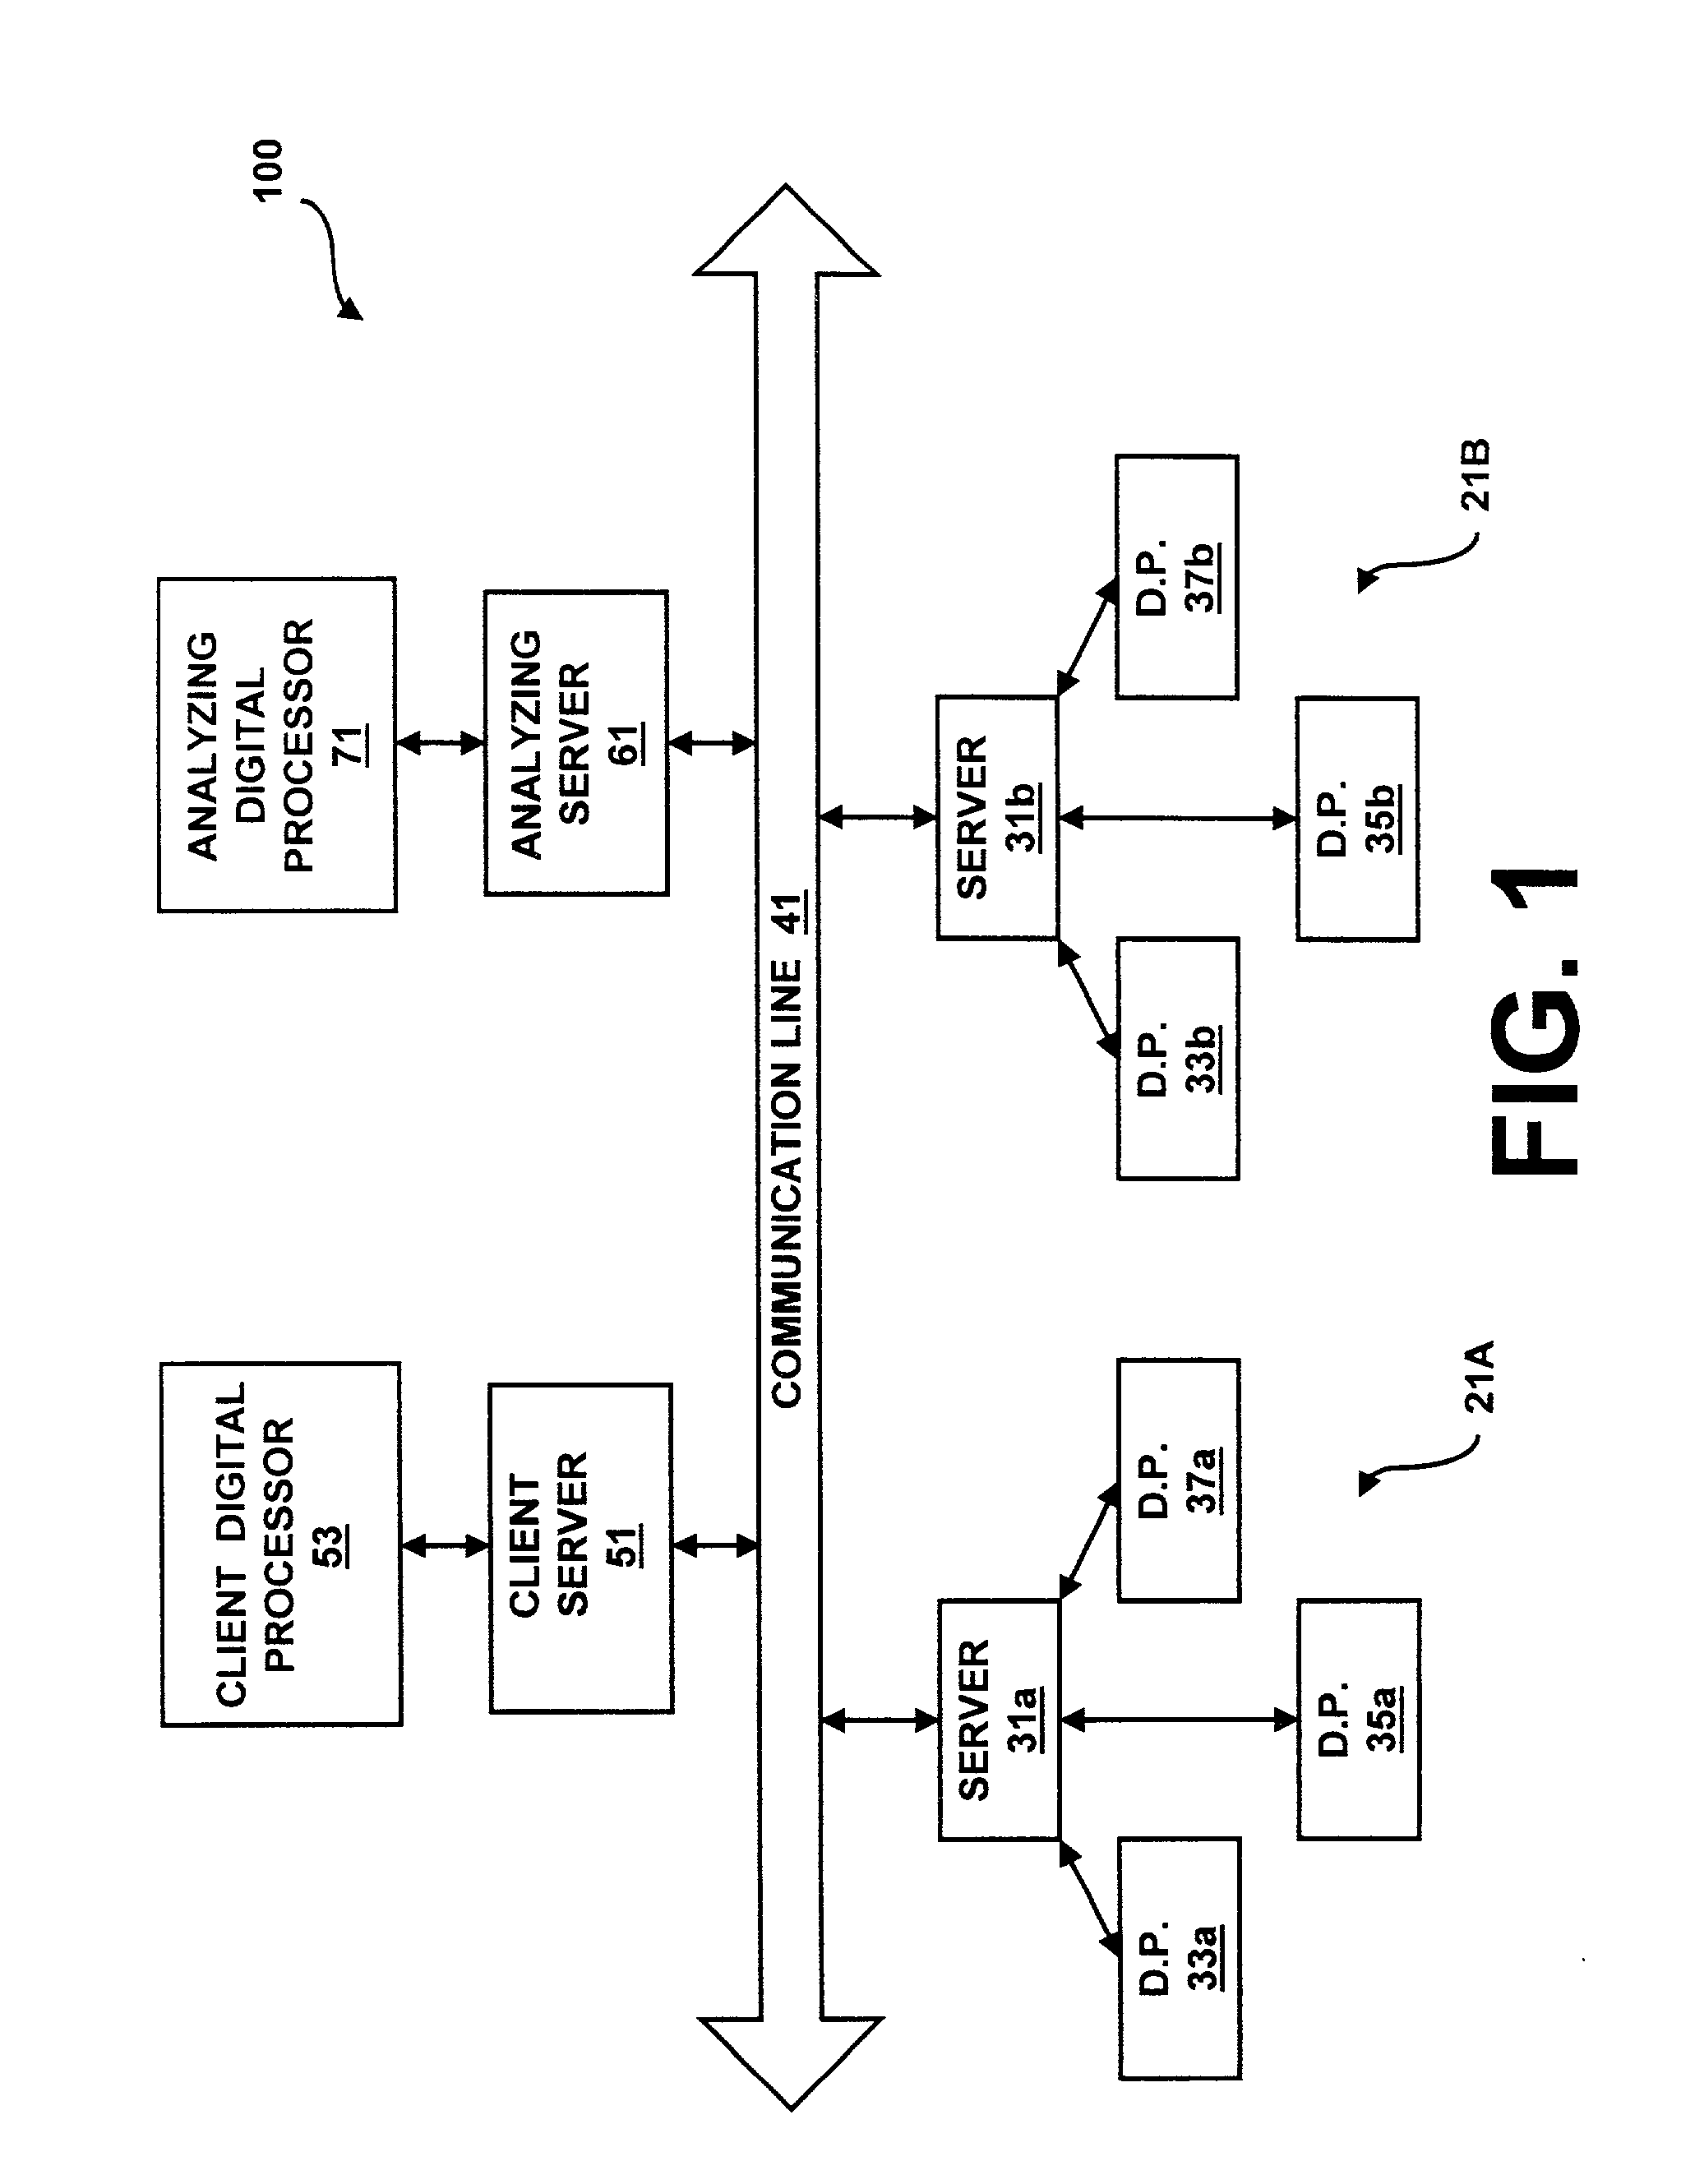 System and method for analyzing wireless communication data